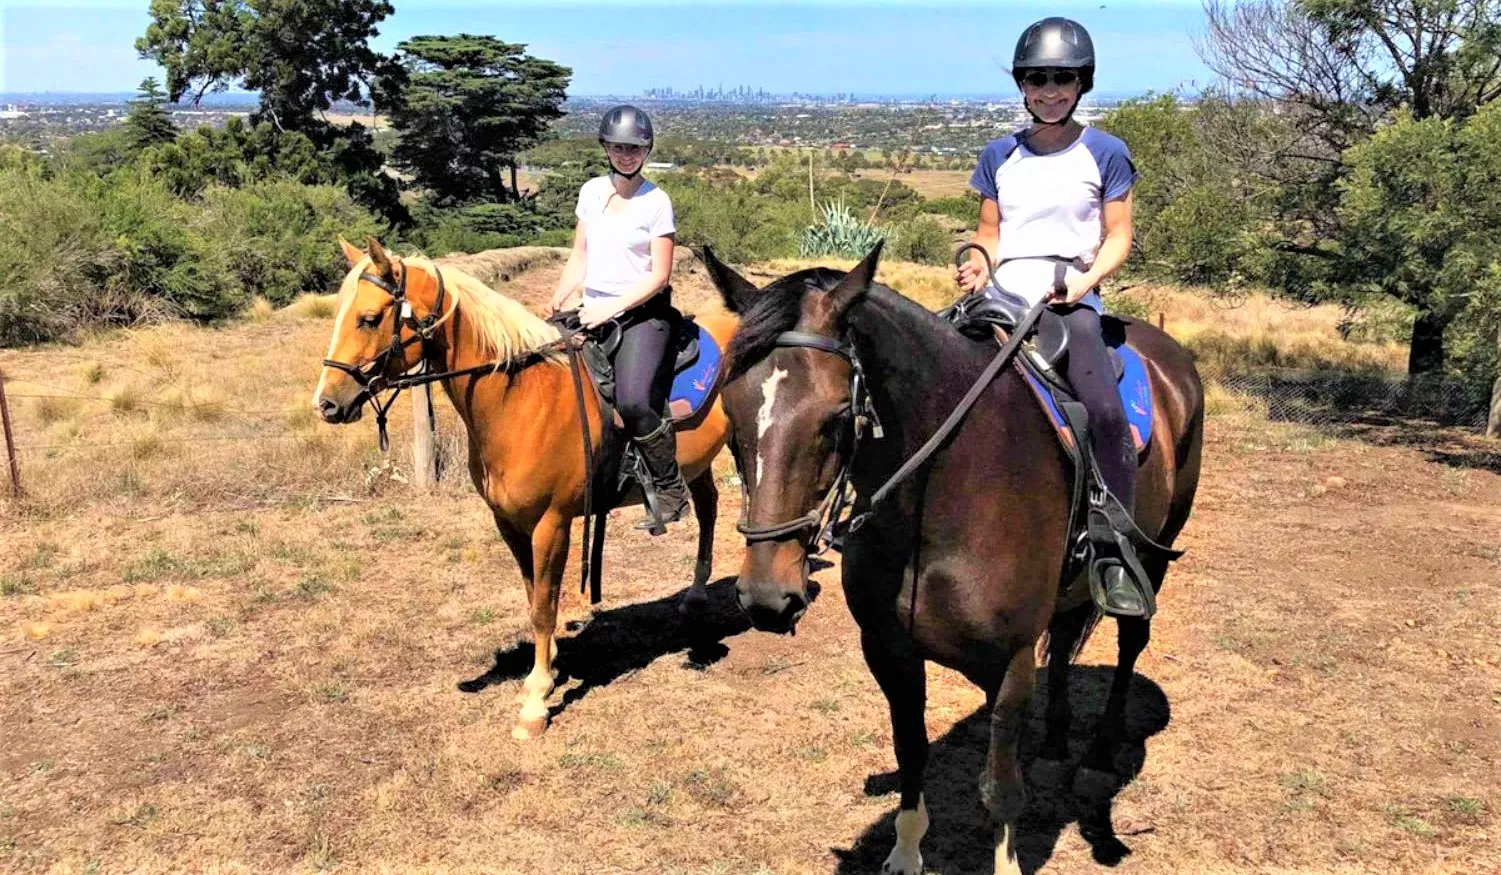 Woodlands Trail Riding in Australia, Australia and Oceania | Horseback Riding - Rated 1